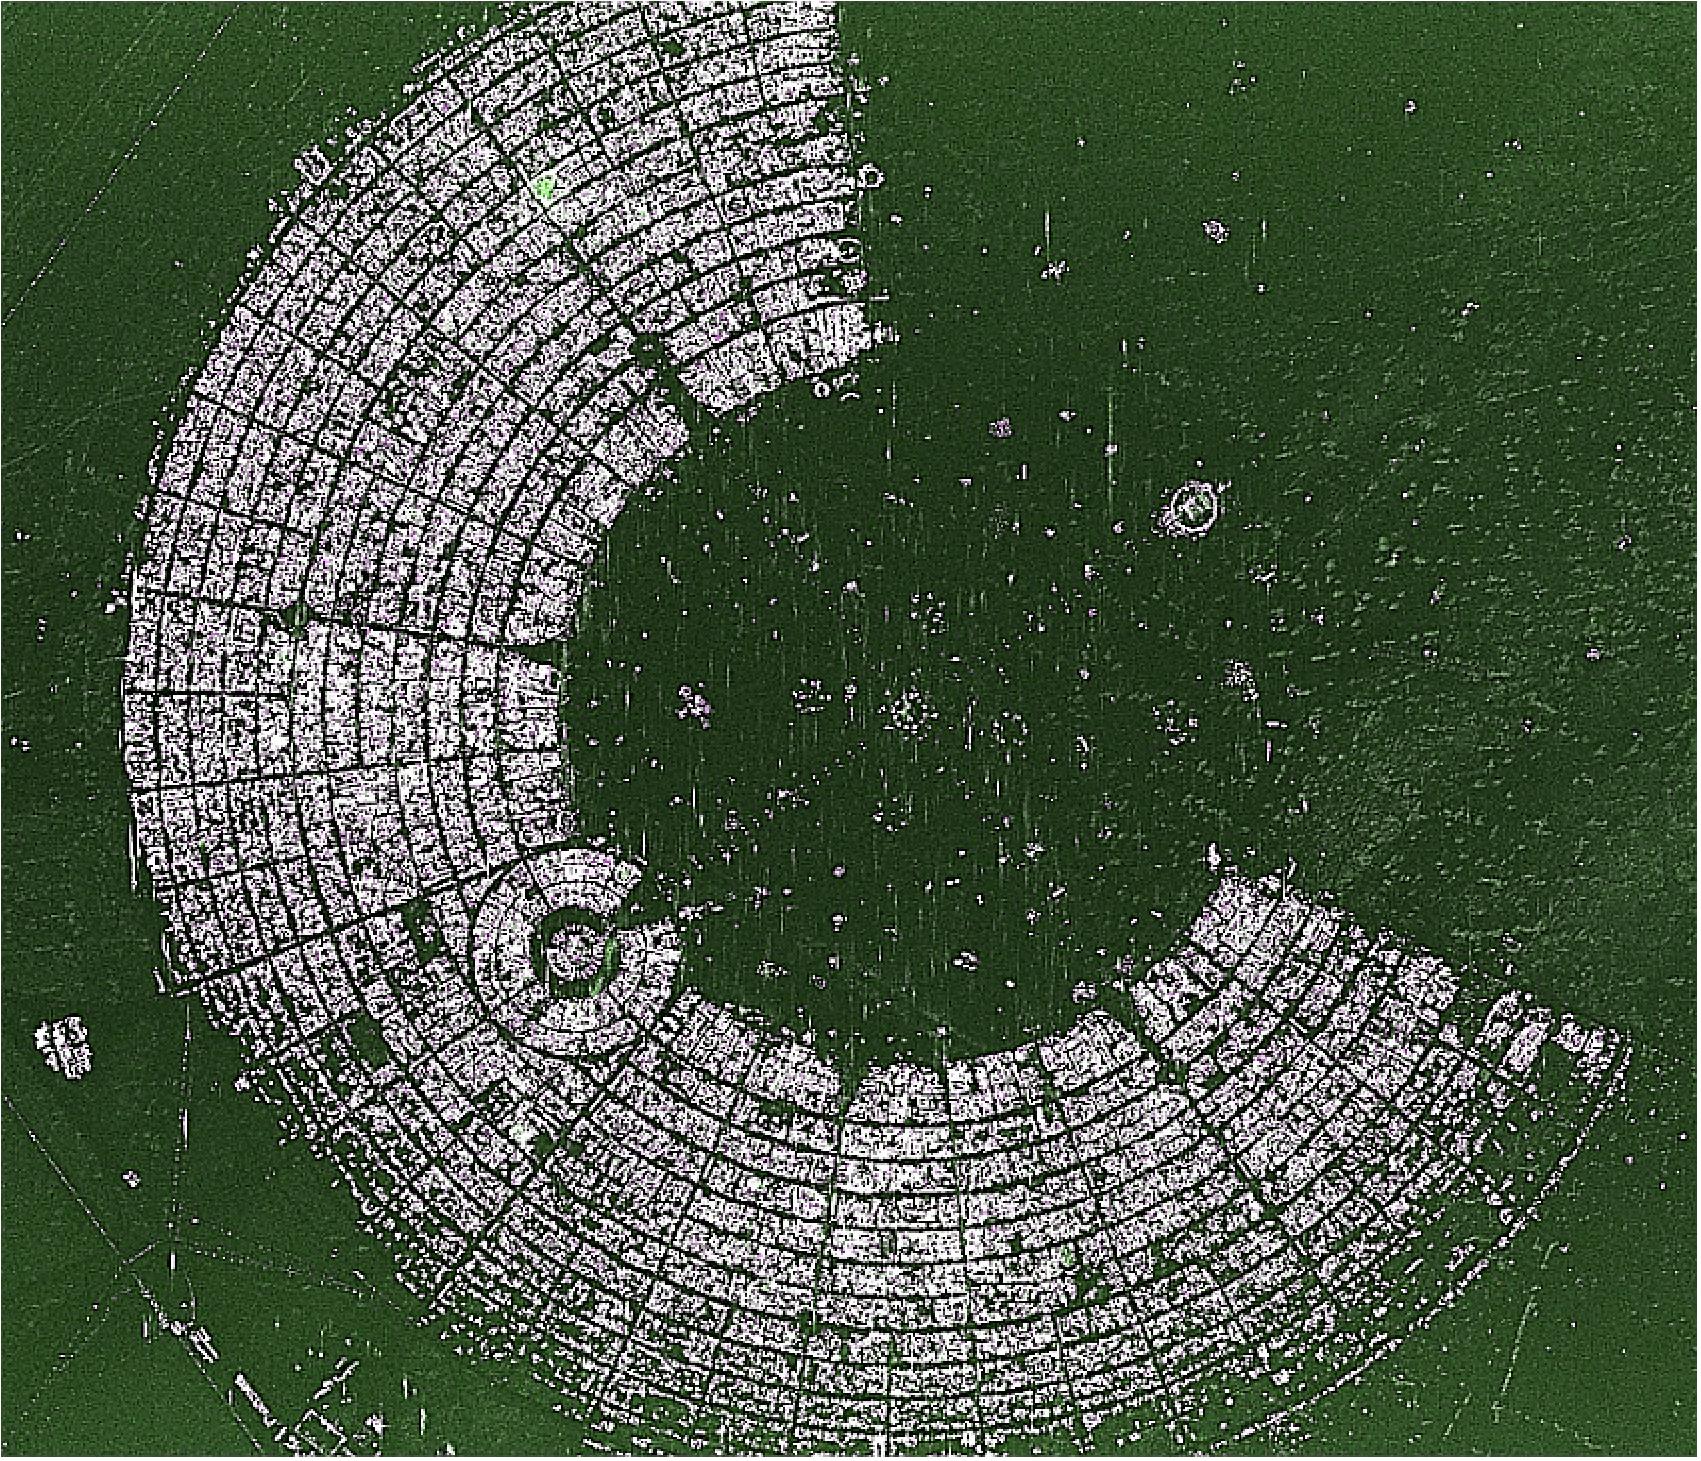 Figure 28: Staring Spotlight scene of 3 km x 3.5 km with a resolution of 1m x 1m, showing the Burning Man Festival 2013, a 'Tent City' arising in a semicircle around its central point in Black Rock City, Nevada, USA. The original azimuth resolution of 24 cm was reduced to 1 m, due to multi-looking, in order to improve the radiometric resolution (image credit: DLR)